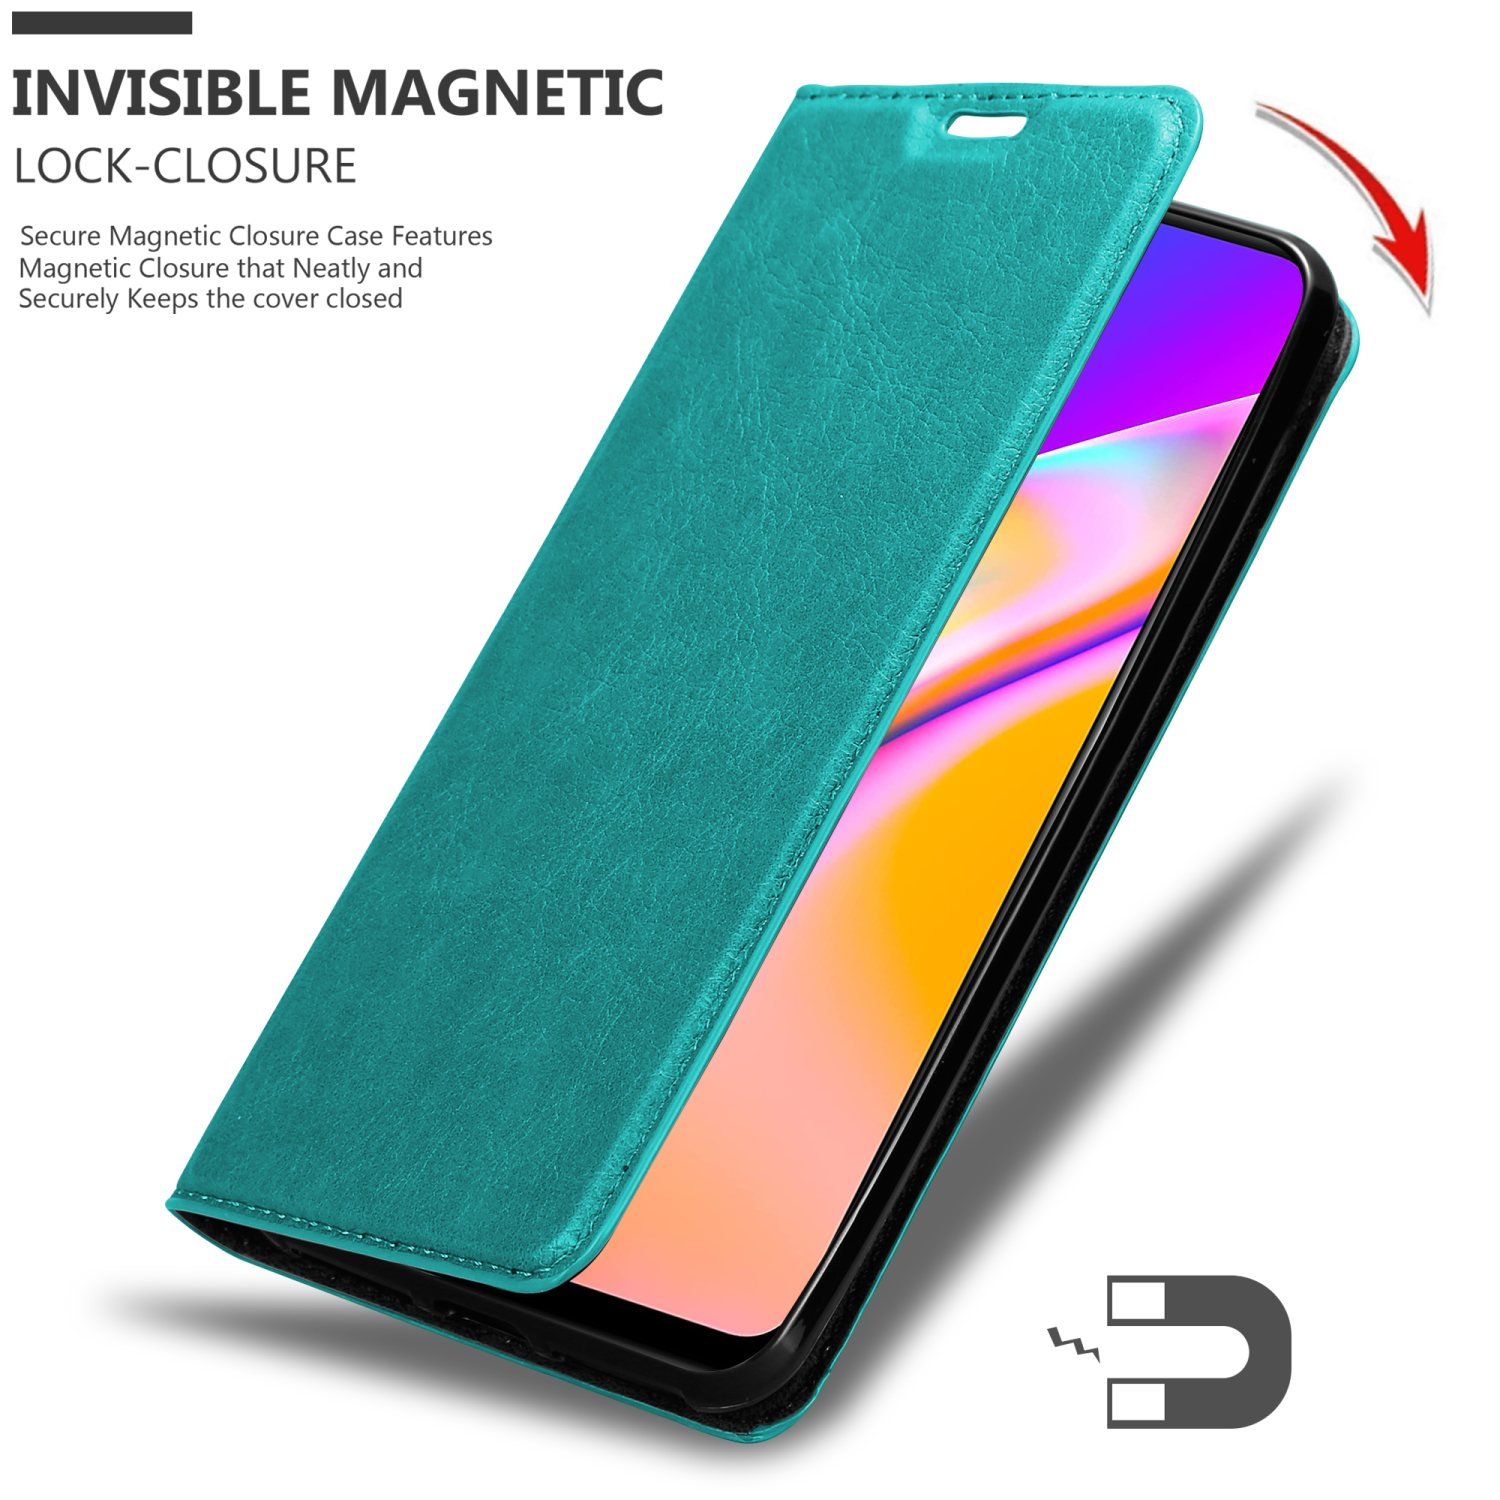 Book 5G, Invisible Magnet, Bookcover, TÜRKIS Oppo, PETROL A94 CADORABO Hülle